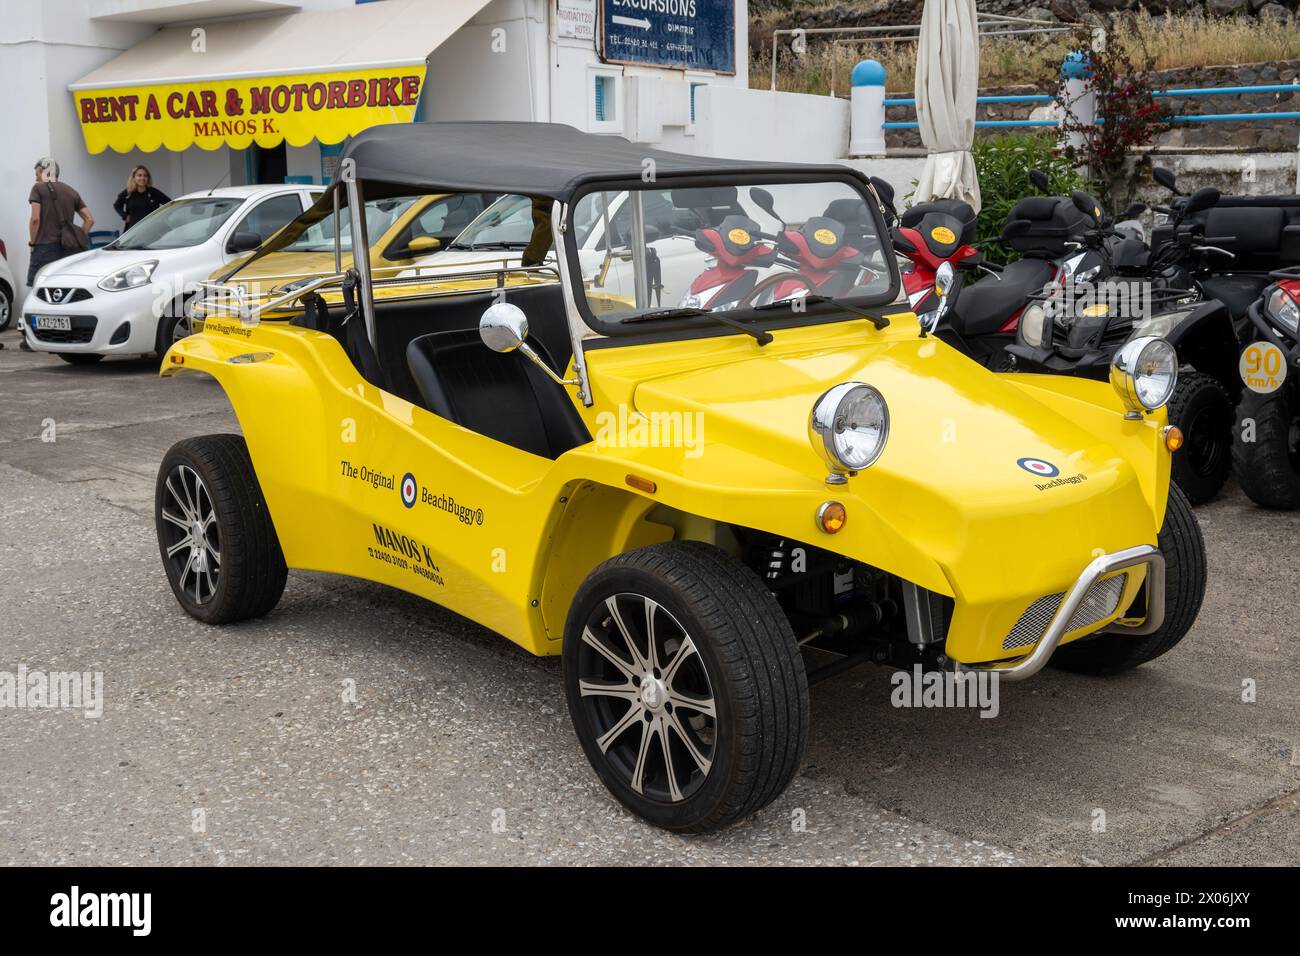 Nisyros, Greece - May 10, 2023: Beach Buggy ready for rent in a local rental company on the island of Nisyros. Greece Stock Photo